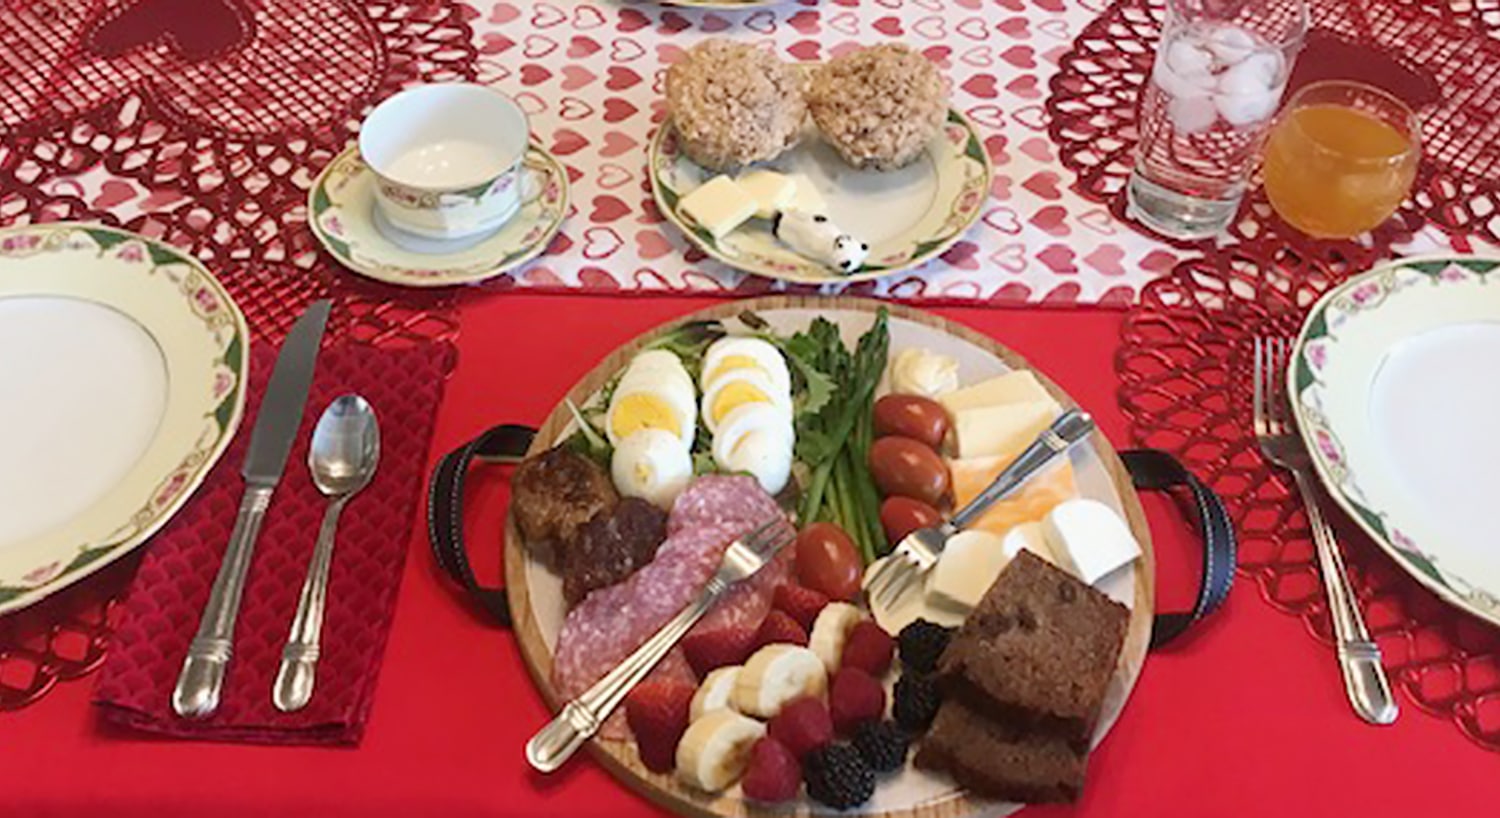 Place setting for a Valentine's meal - a plate full of meat, cheese, eggs, fruit, vegetables, and bread, a dessert plate with baked goods, and a teacup on a table with a red tablecloth.